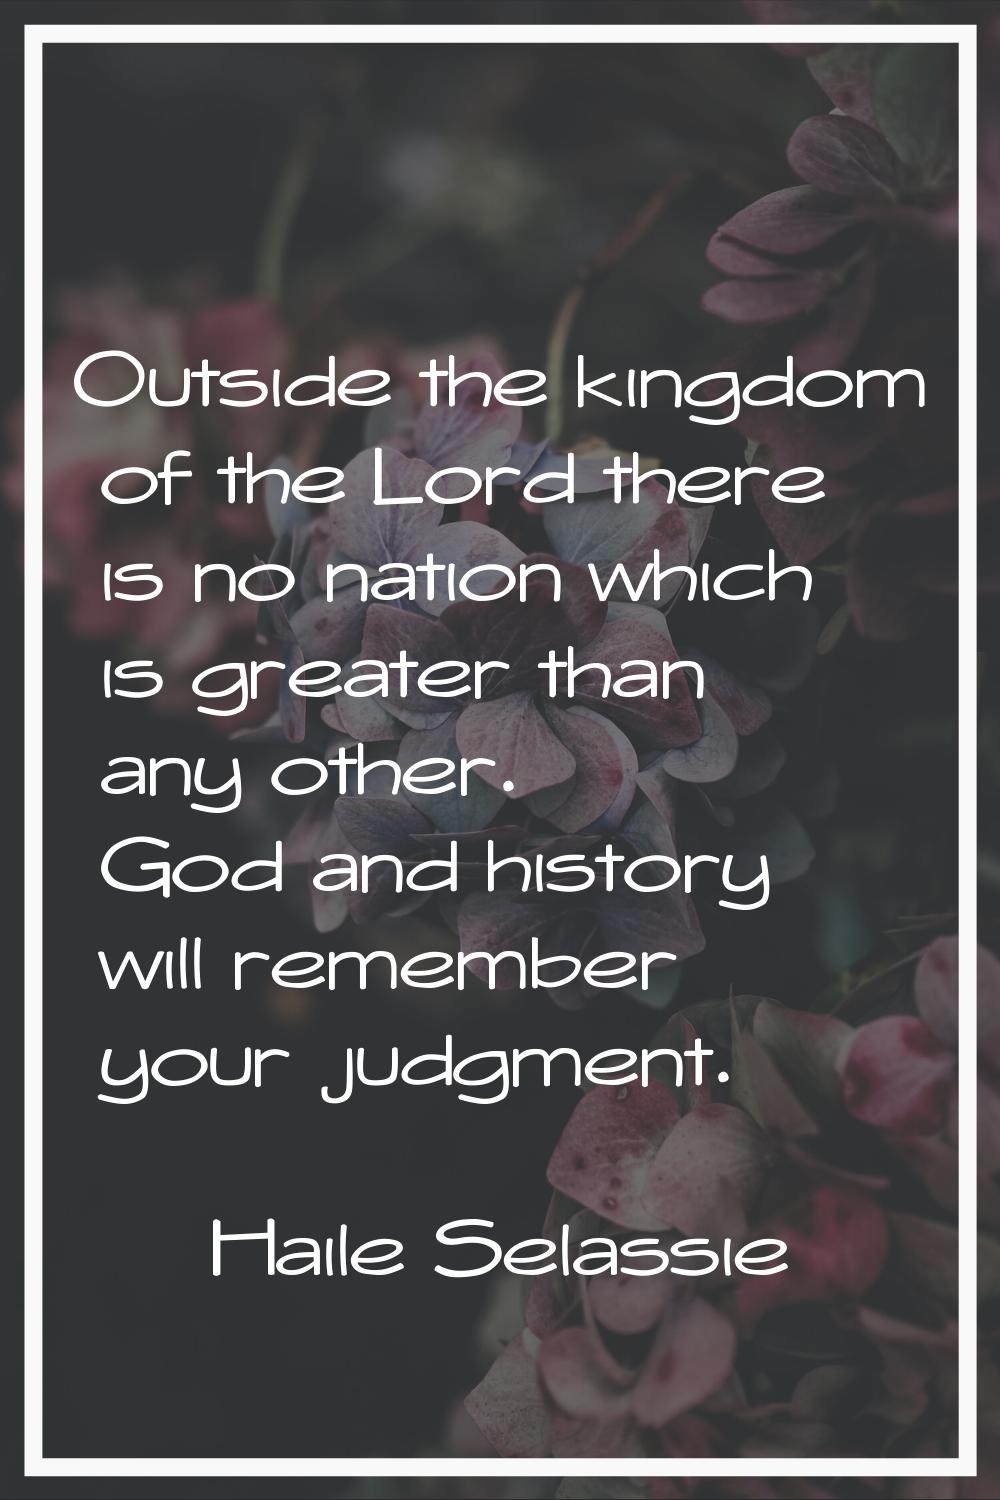 Outside the kingdom of the Lord there is no nation which is greater than any other. God and history